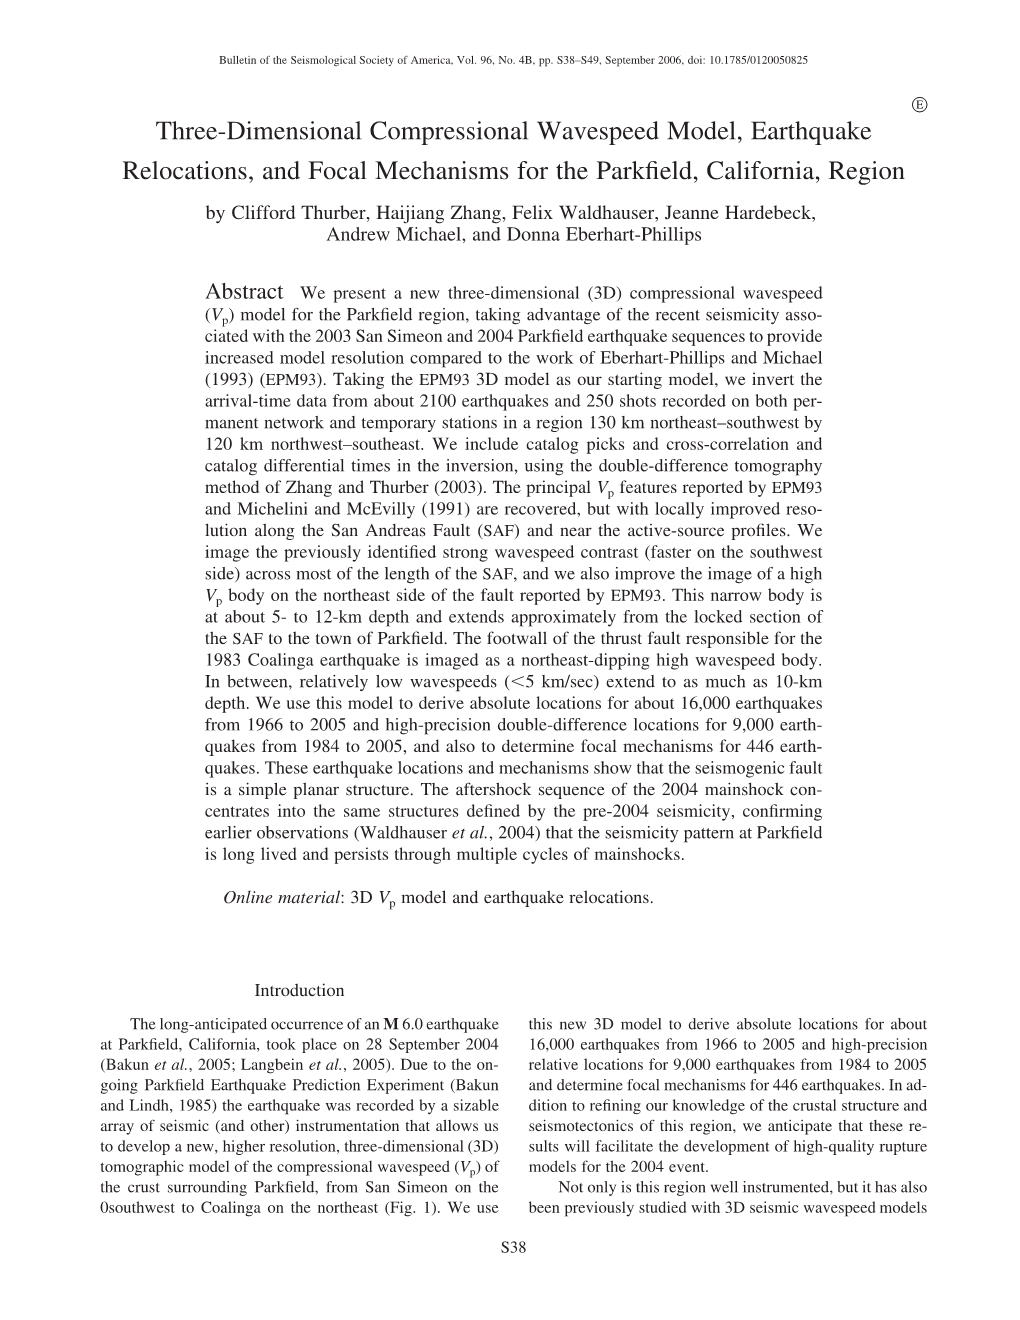 Three-Dimensional Compressional Wavespeed Model, Earthquake Relocations, and Focal Mechanisms for the Parkfield, California